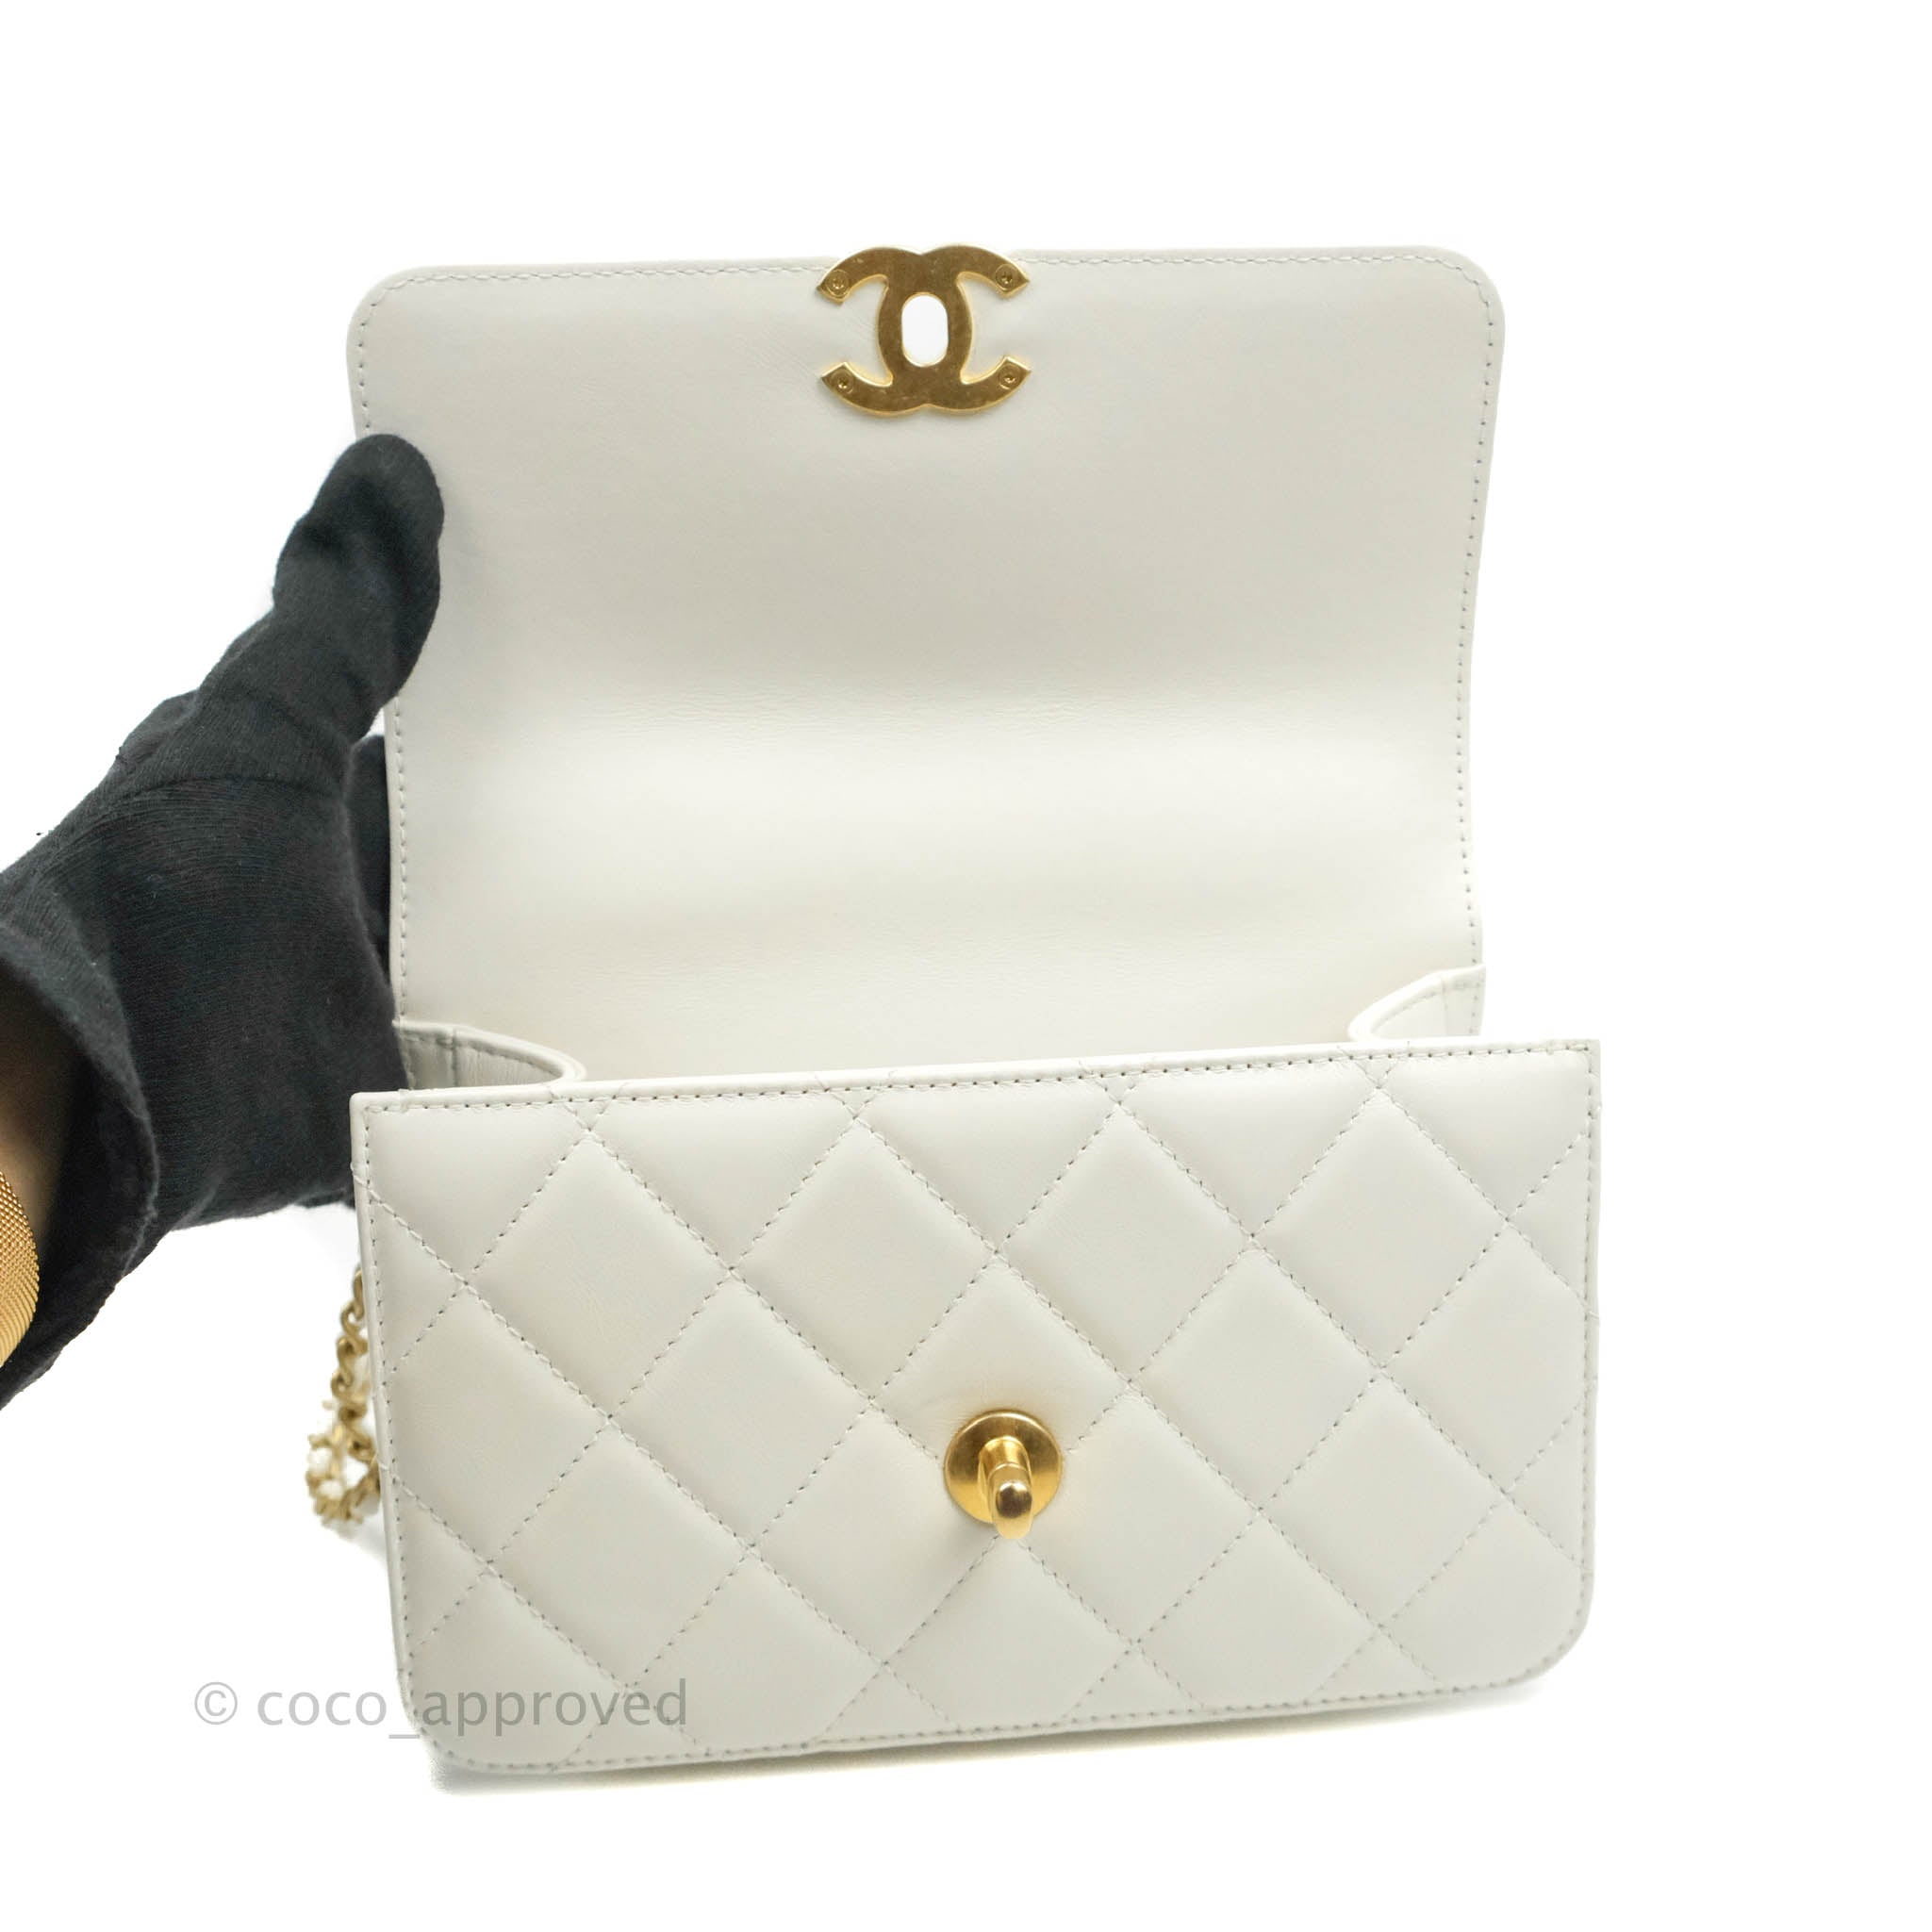 CHANEL Calfskin Quilted Graphic Mini Flap Bag White Black 498039